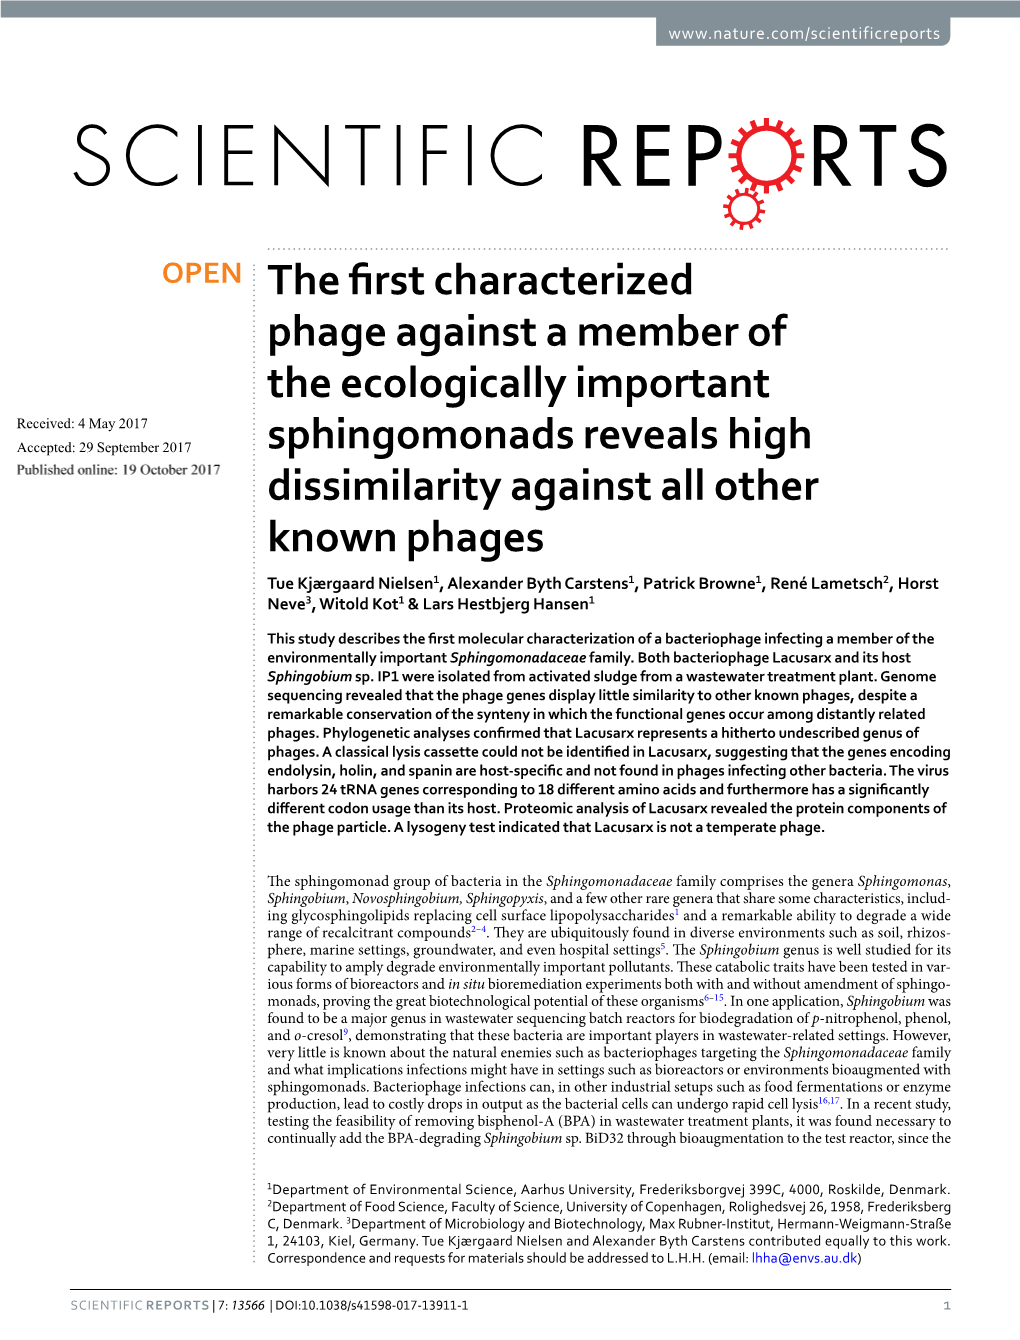 The First Characterized Phage Against a Member of the Ecologically